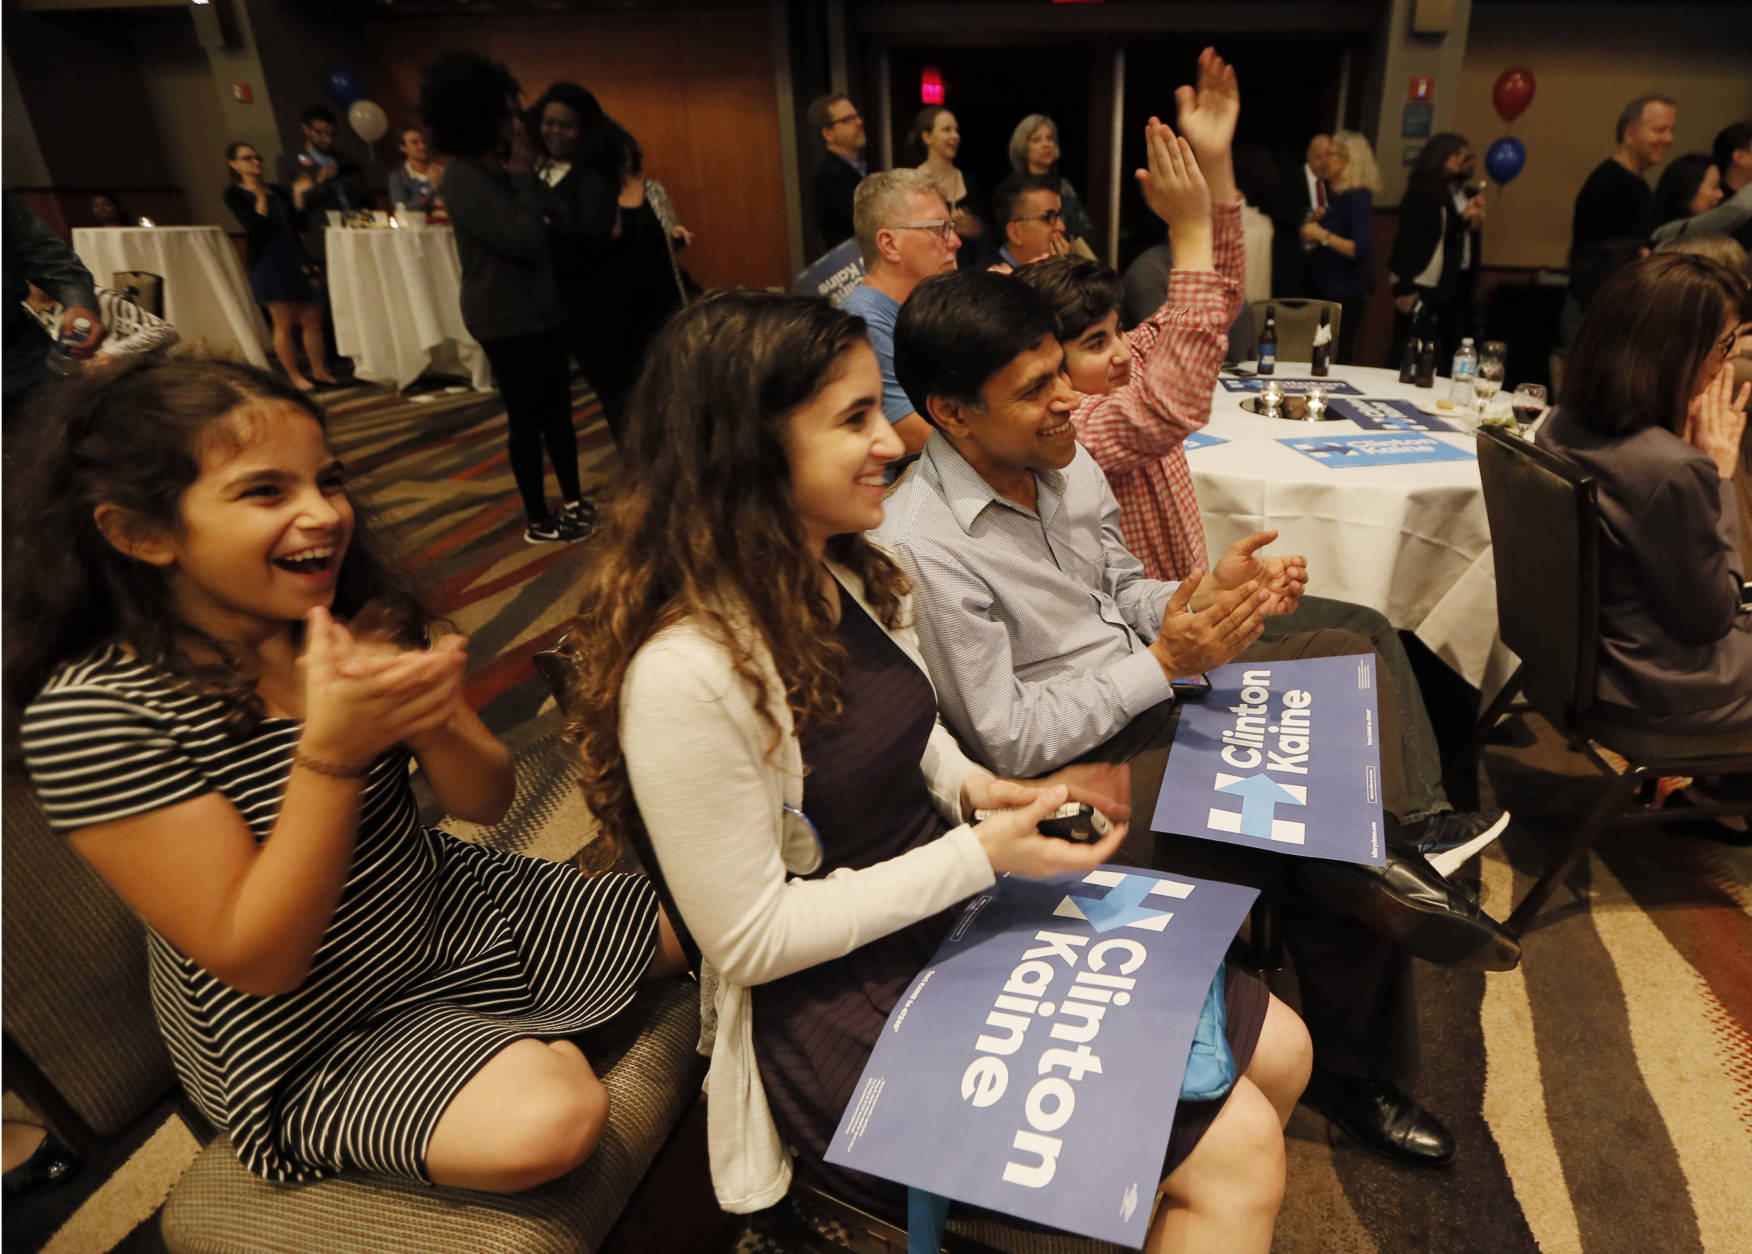 Izzy Agarawal, from left, with her sister Cathy, father, Raj and brother Ben, right, celebrate as they watch returns during the Dallas County Democrats watch party, Tuesday Nov. 8, 2016, in Dallas. (AP Photo/Tony Gutierrez)